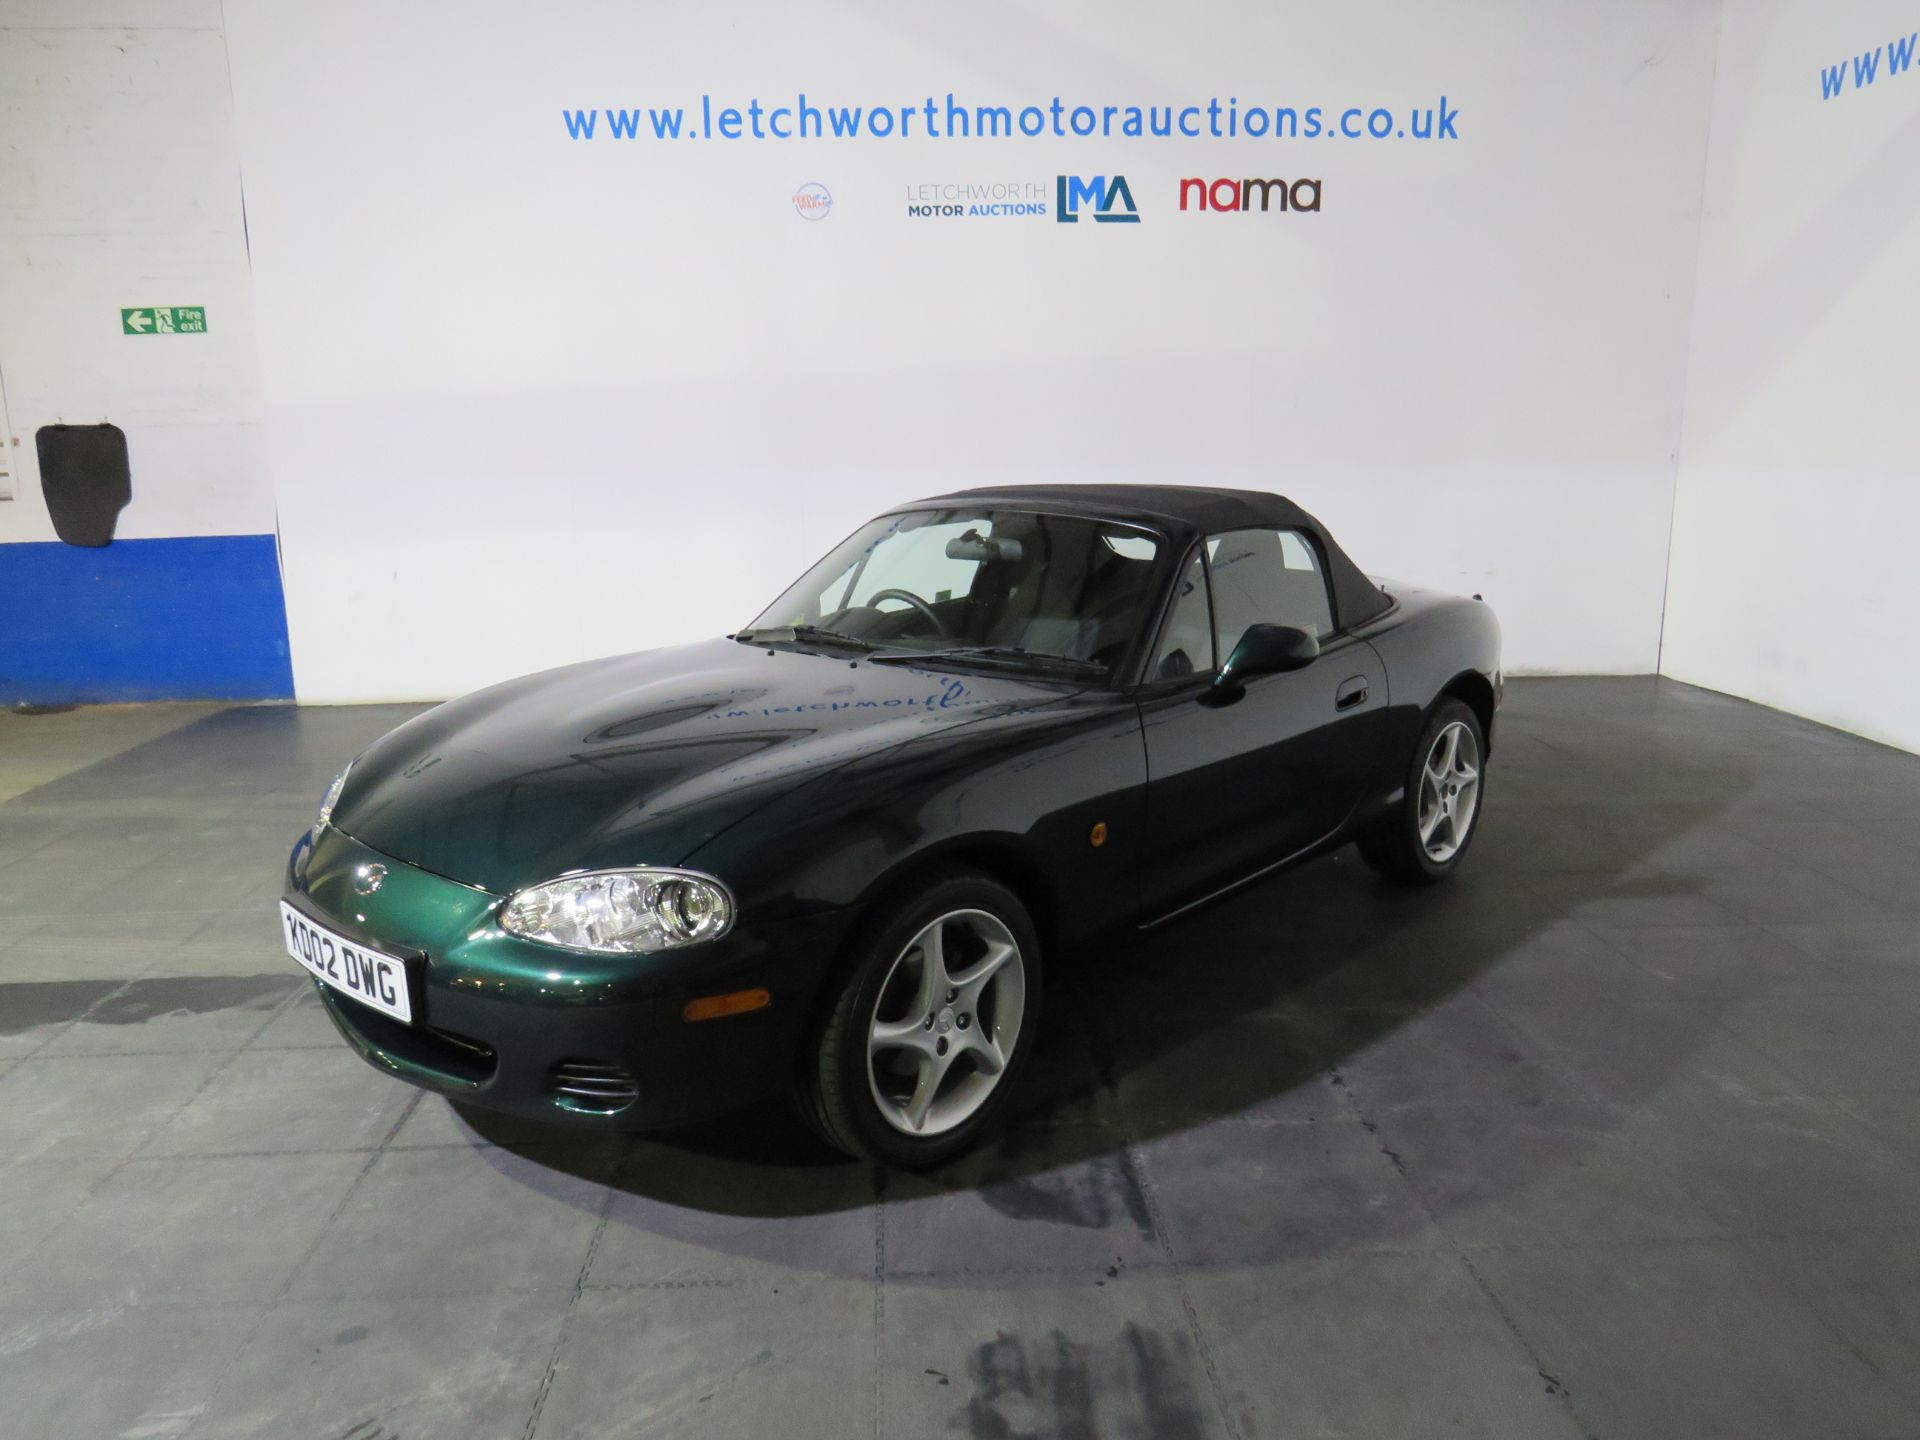 2002 Mazda MX-5 - 1598cc - 1,900 MILES FROM NEW - Image 6 of 39